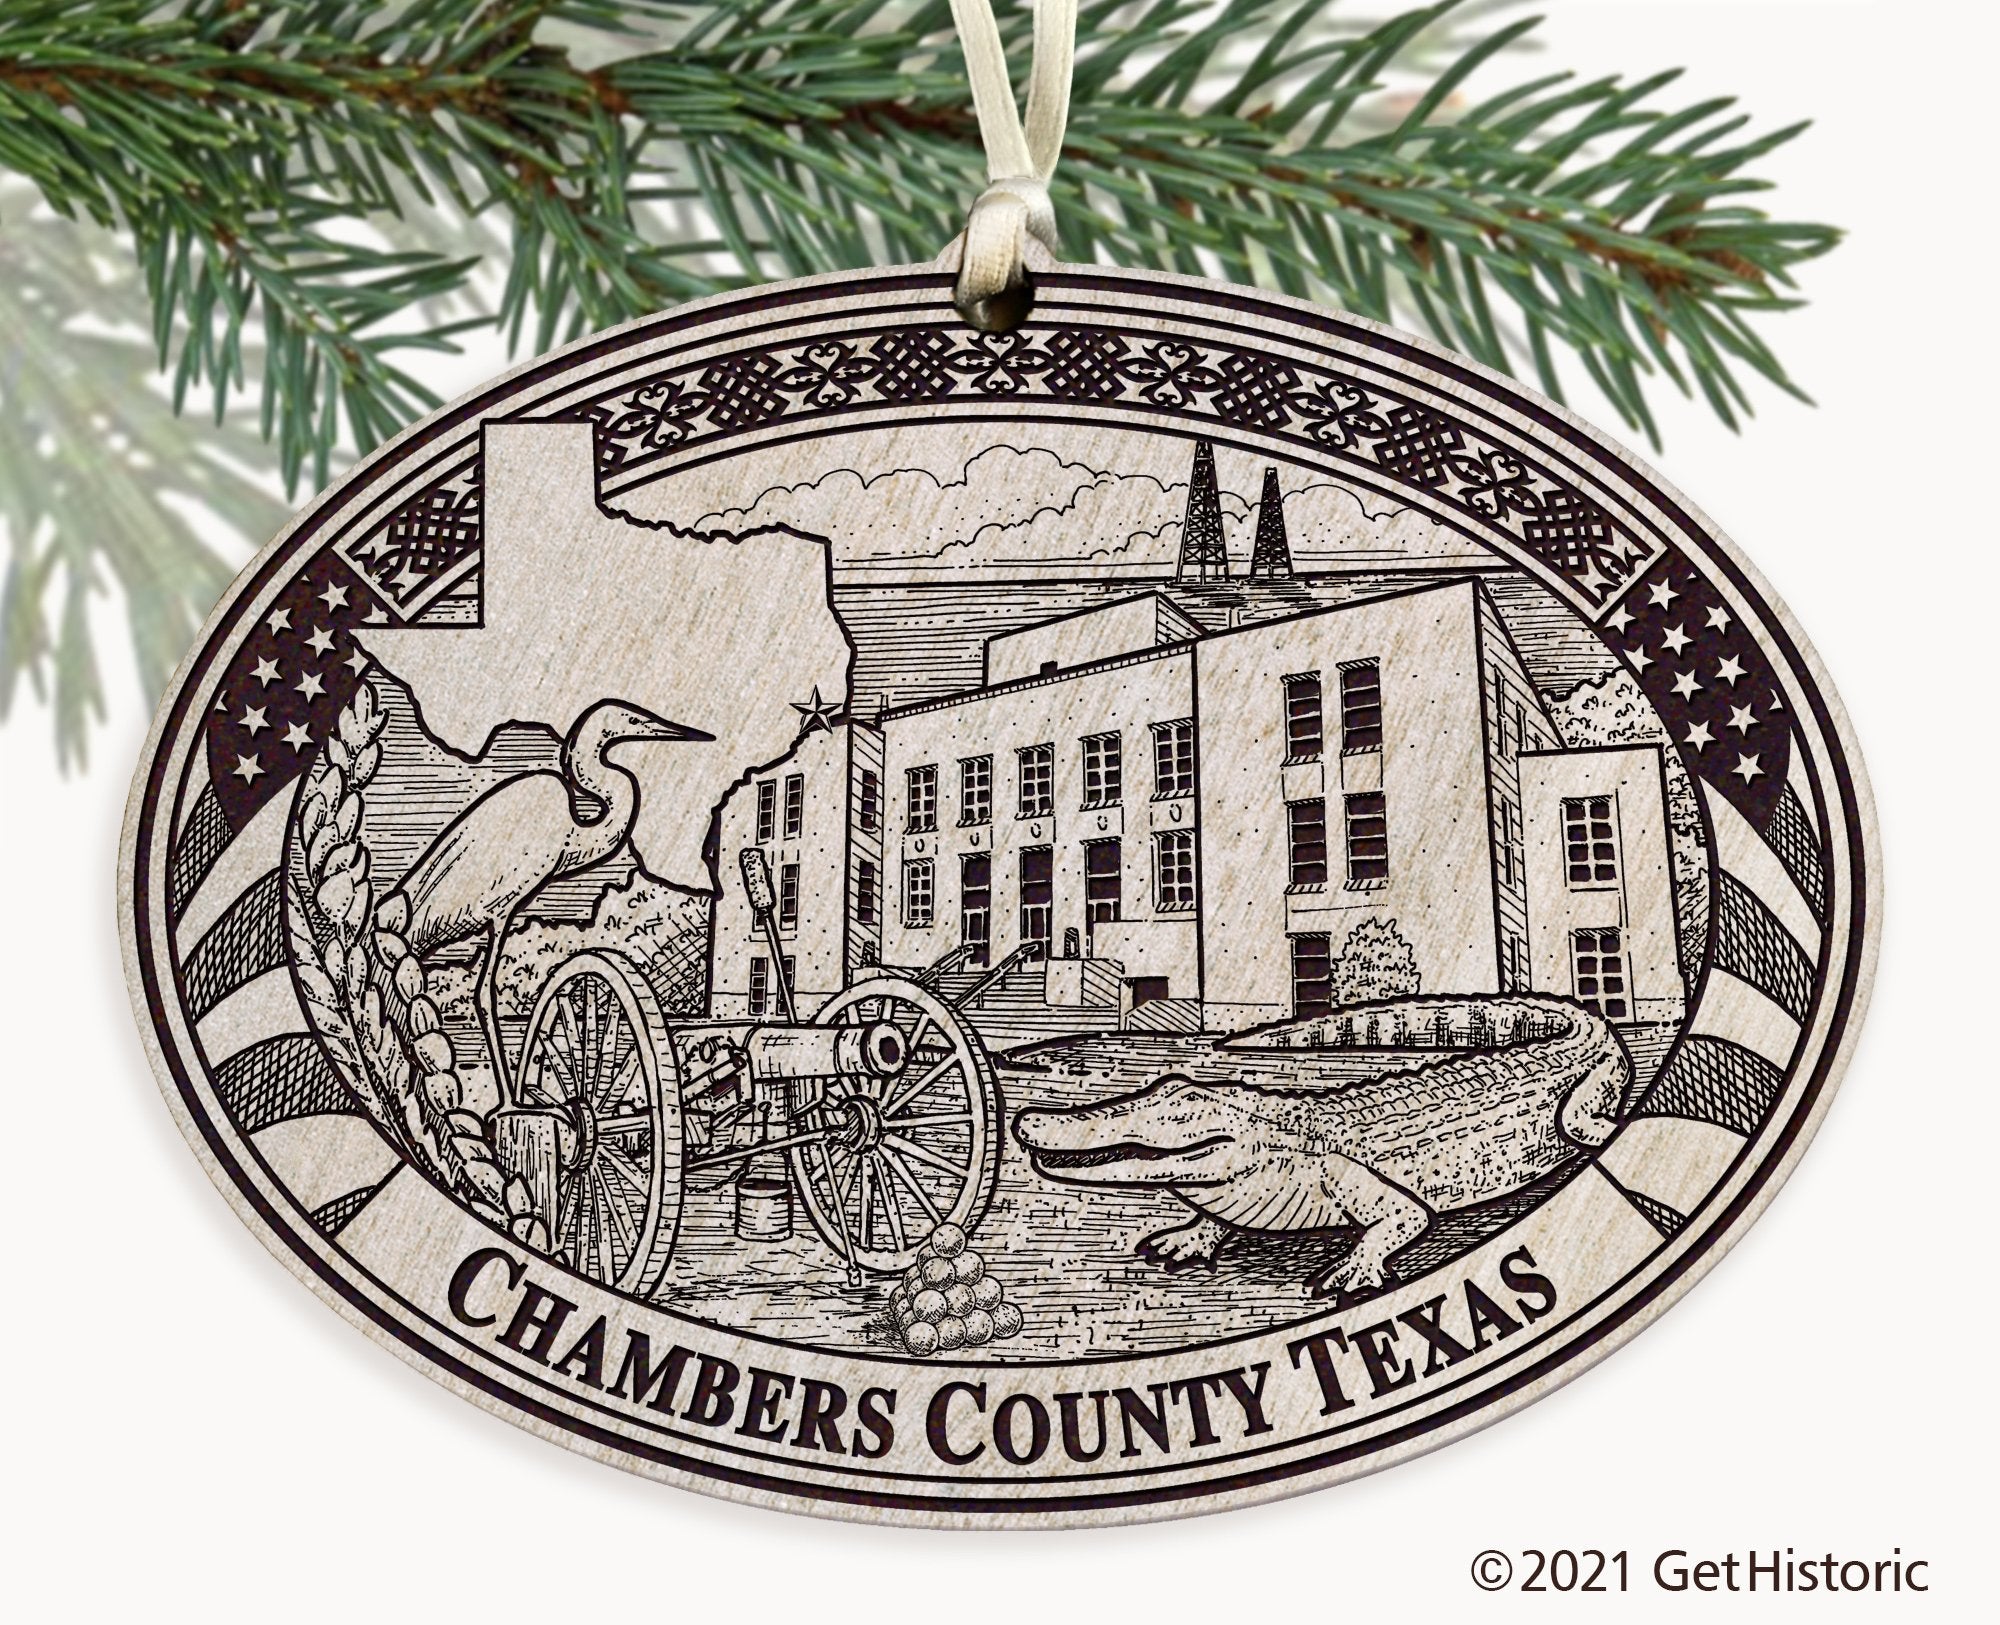 Chambers County Texas Engraved Ornament